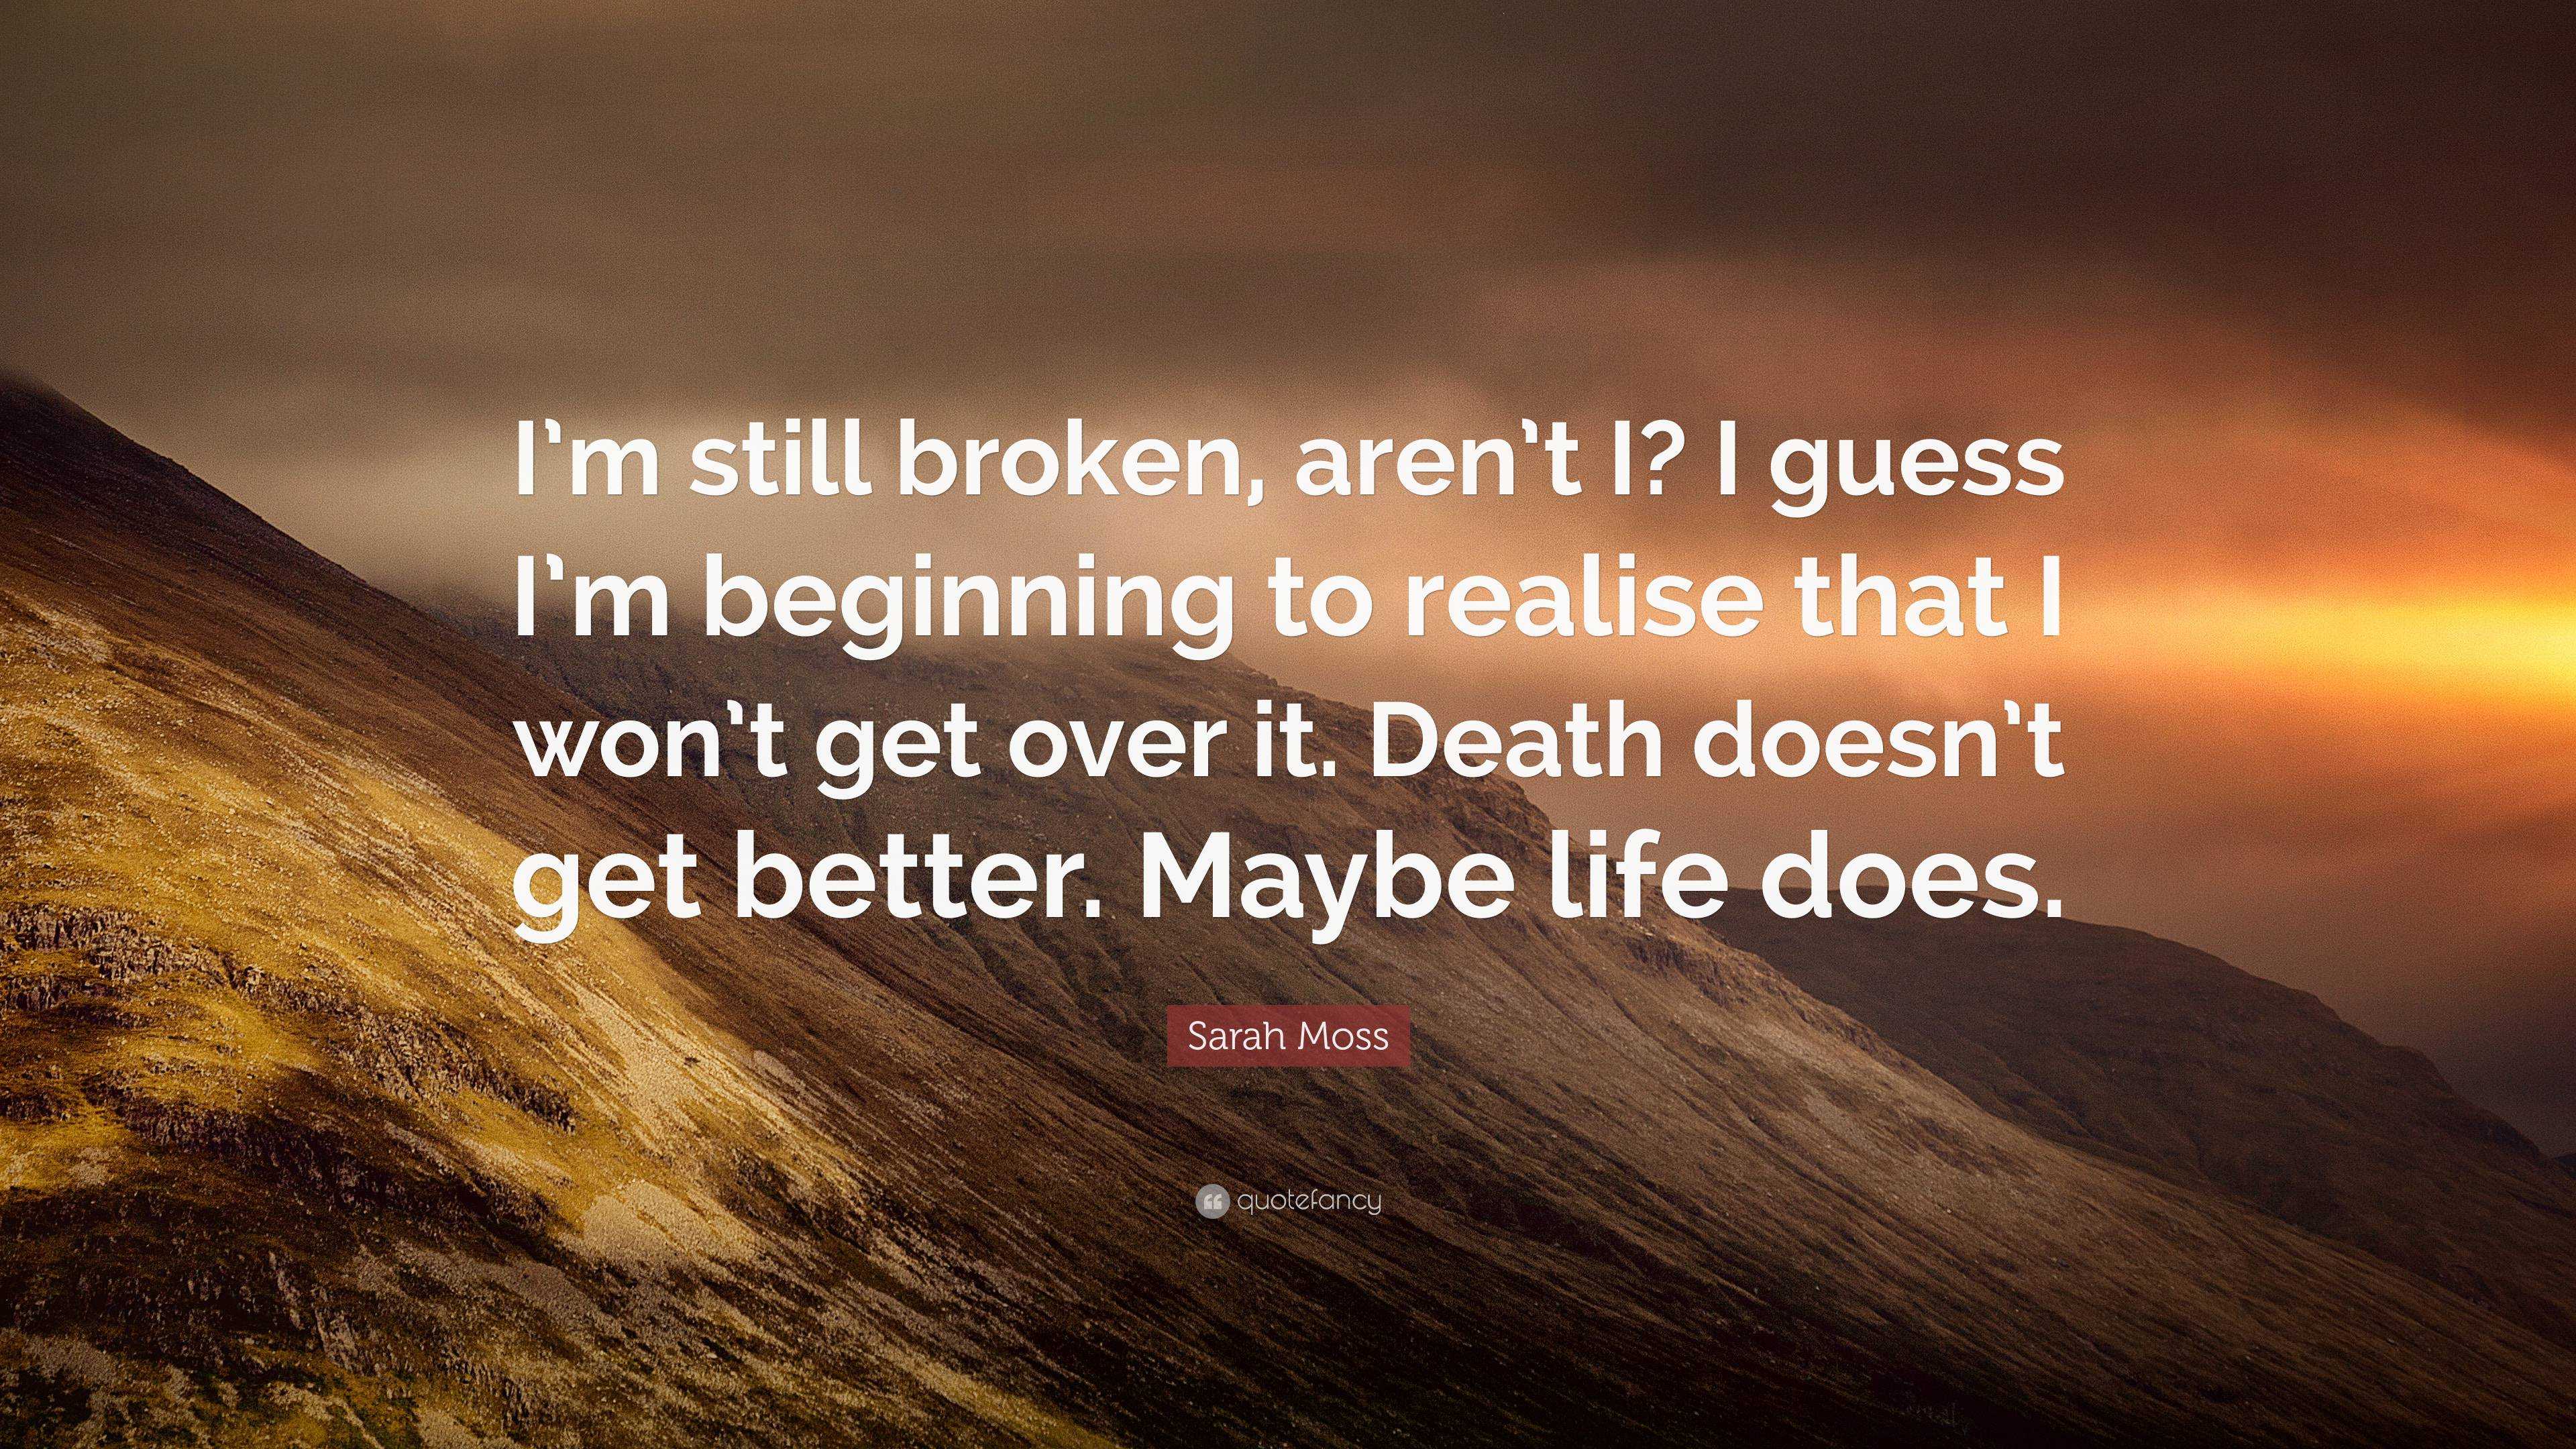 Sarah Moss “I'm still broken, aren't I? I guess I'm to realise that won't get over it. Death doesn't get better. l...”